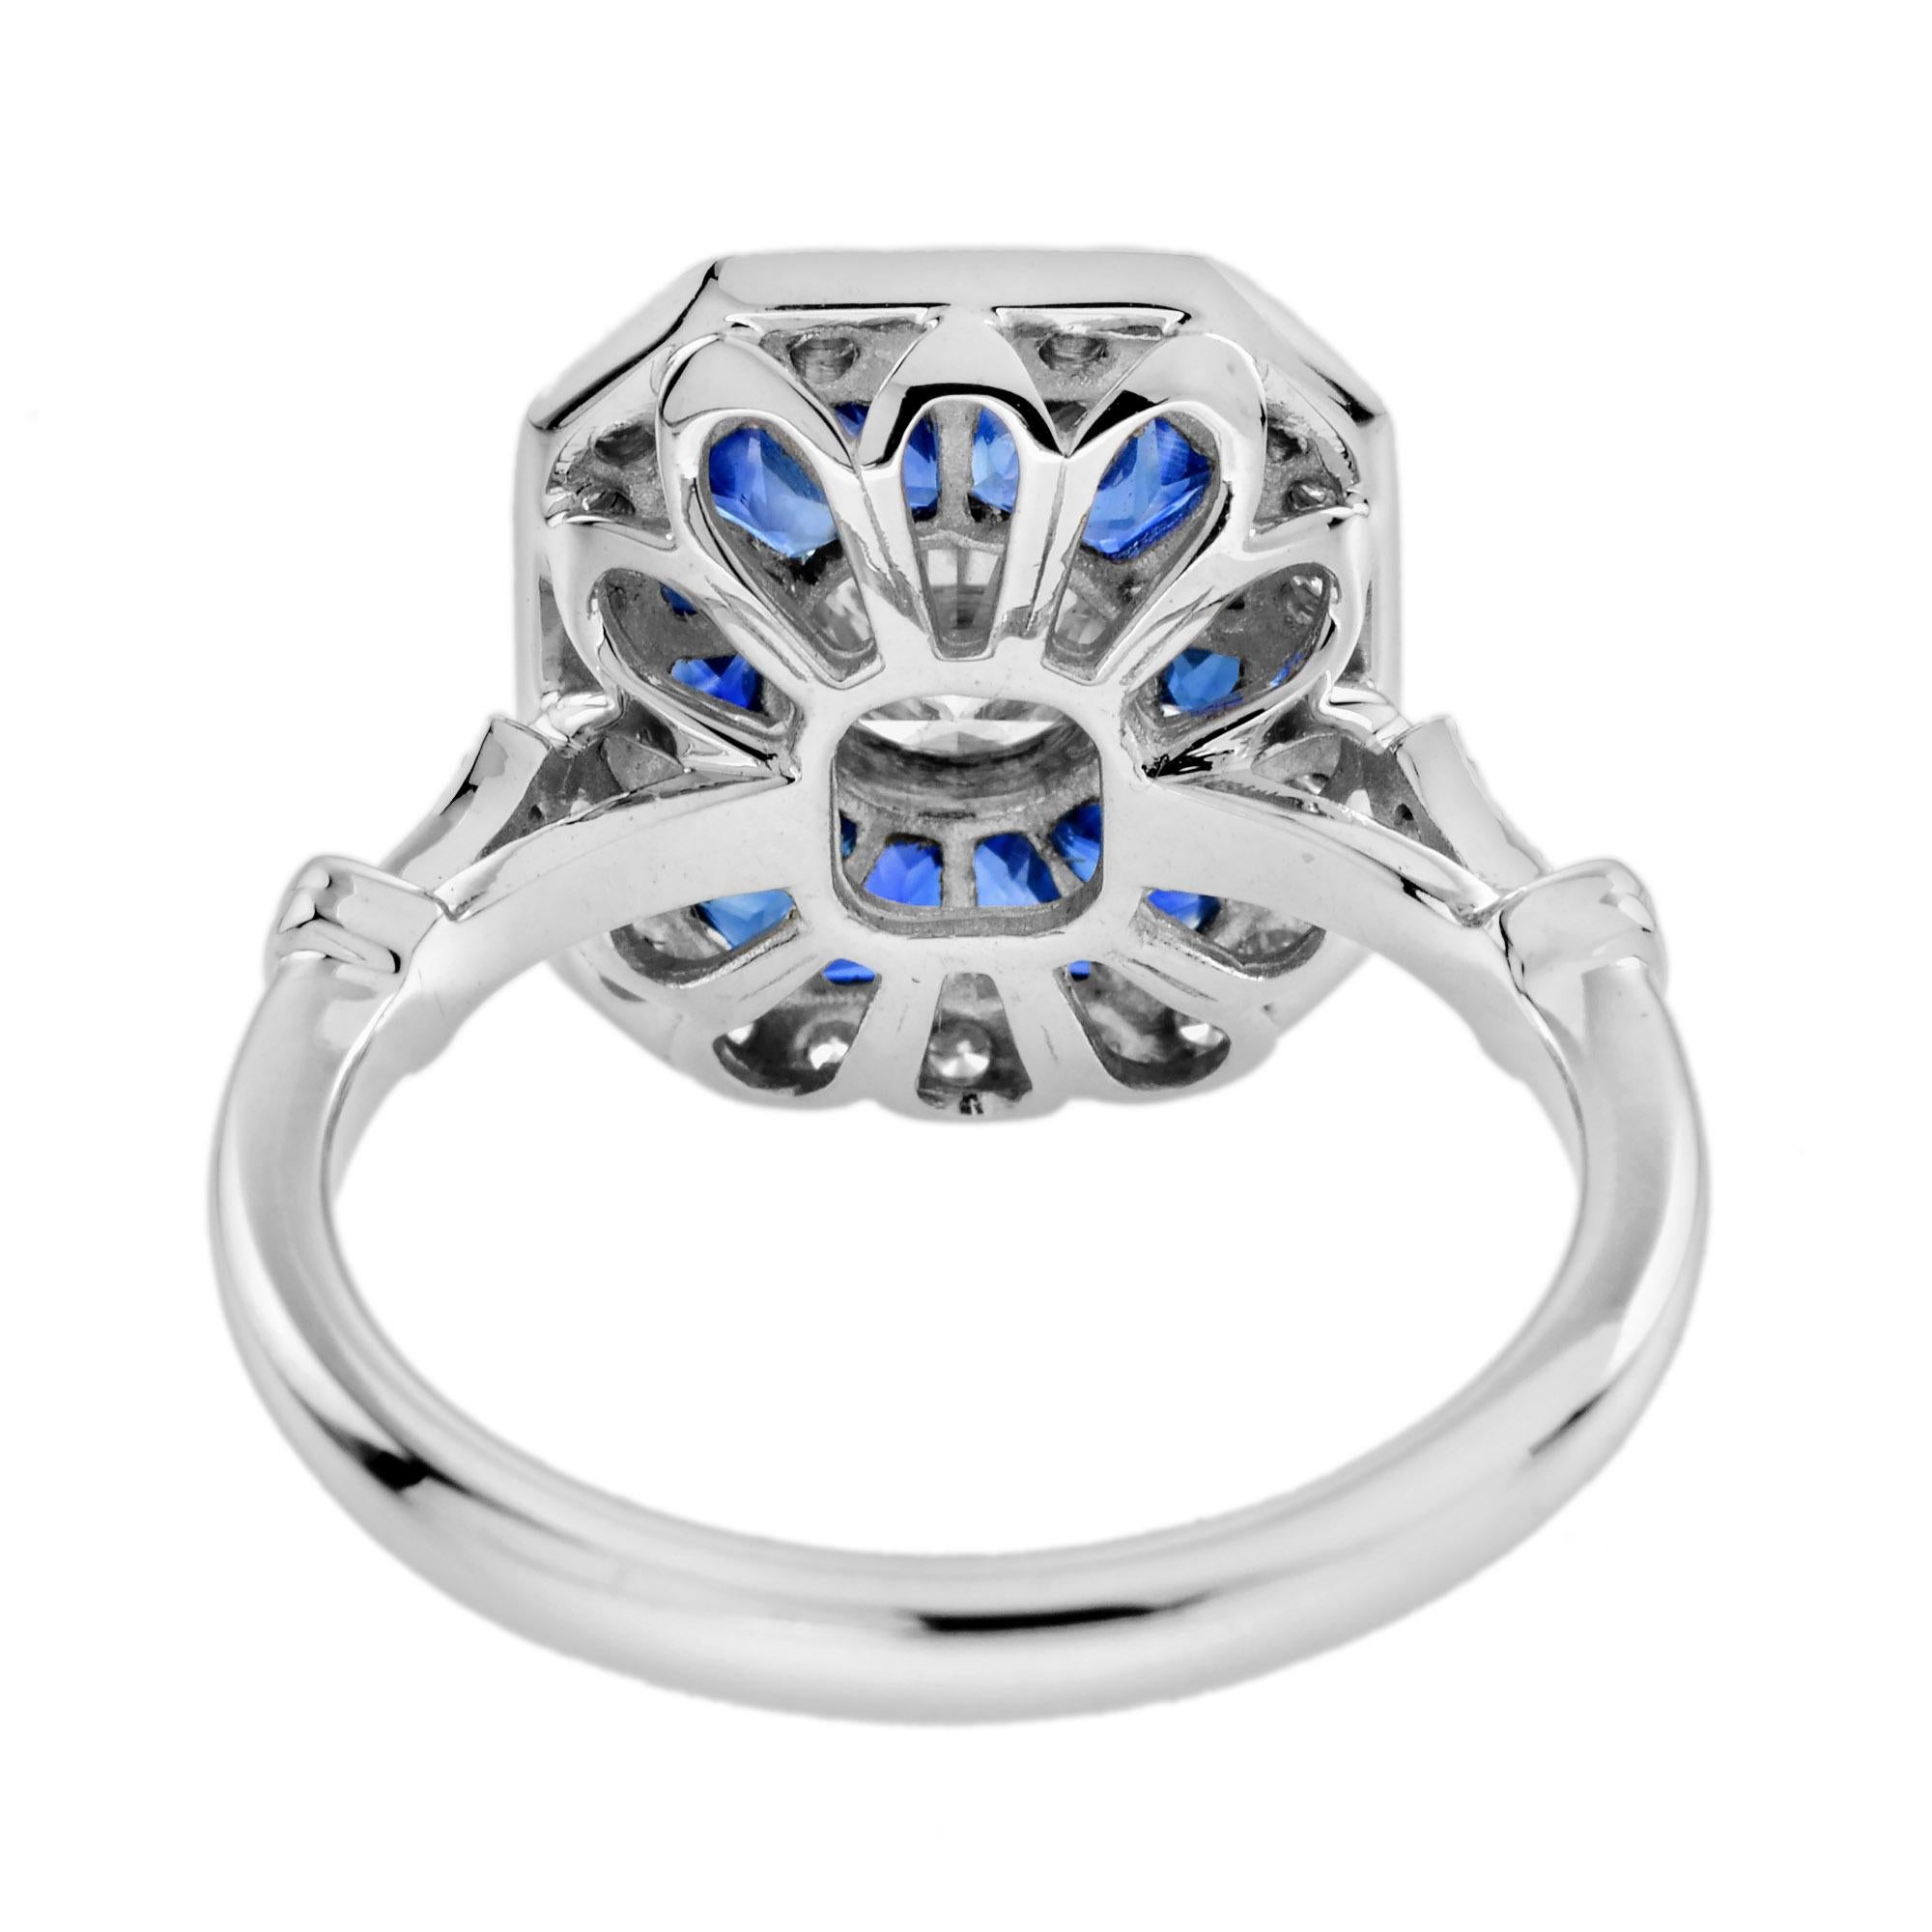 For Sale:  Diamond and Sapphire Art Deco Style Engagement Ring in 18k White Gold 6